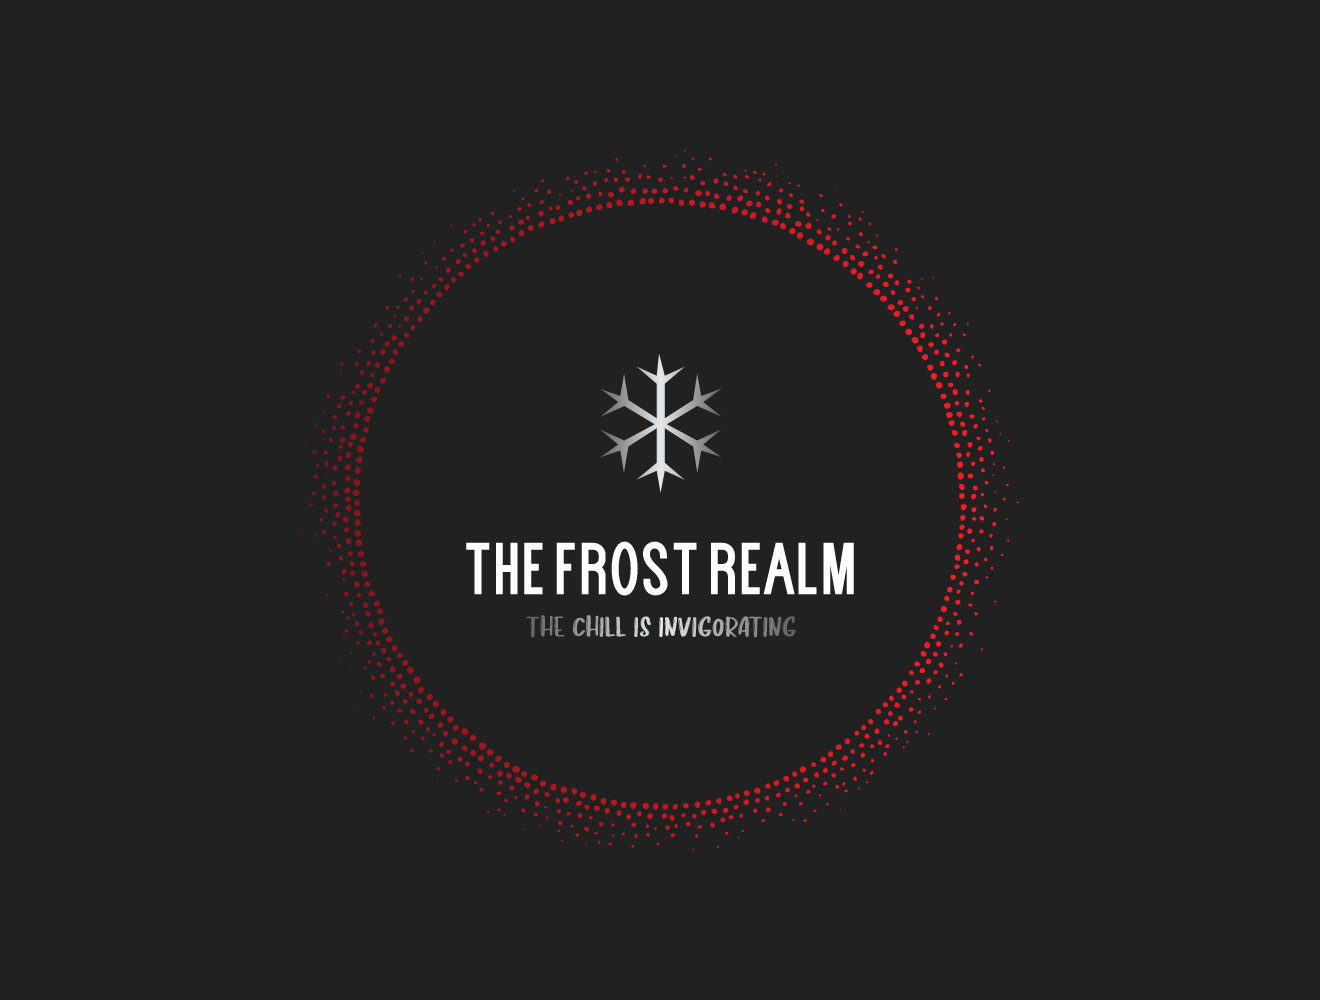 The Frost Realm logo